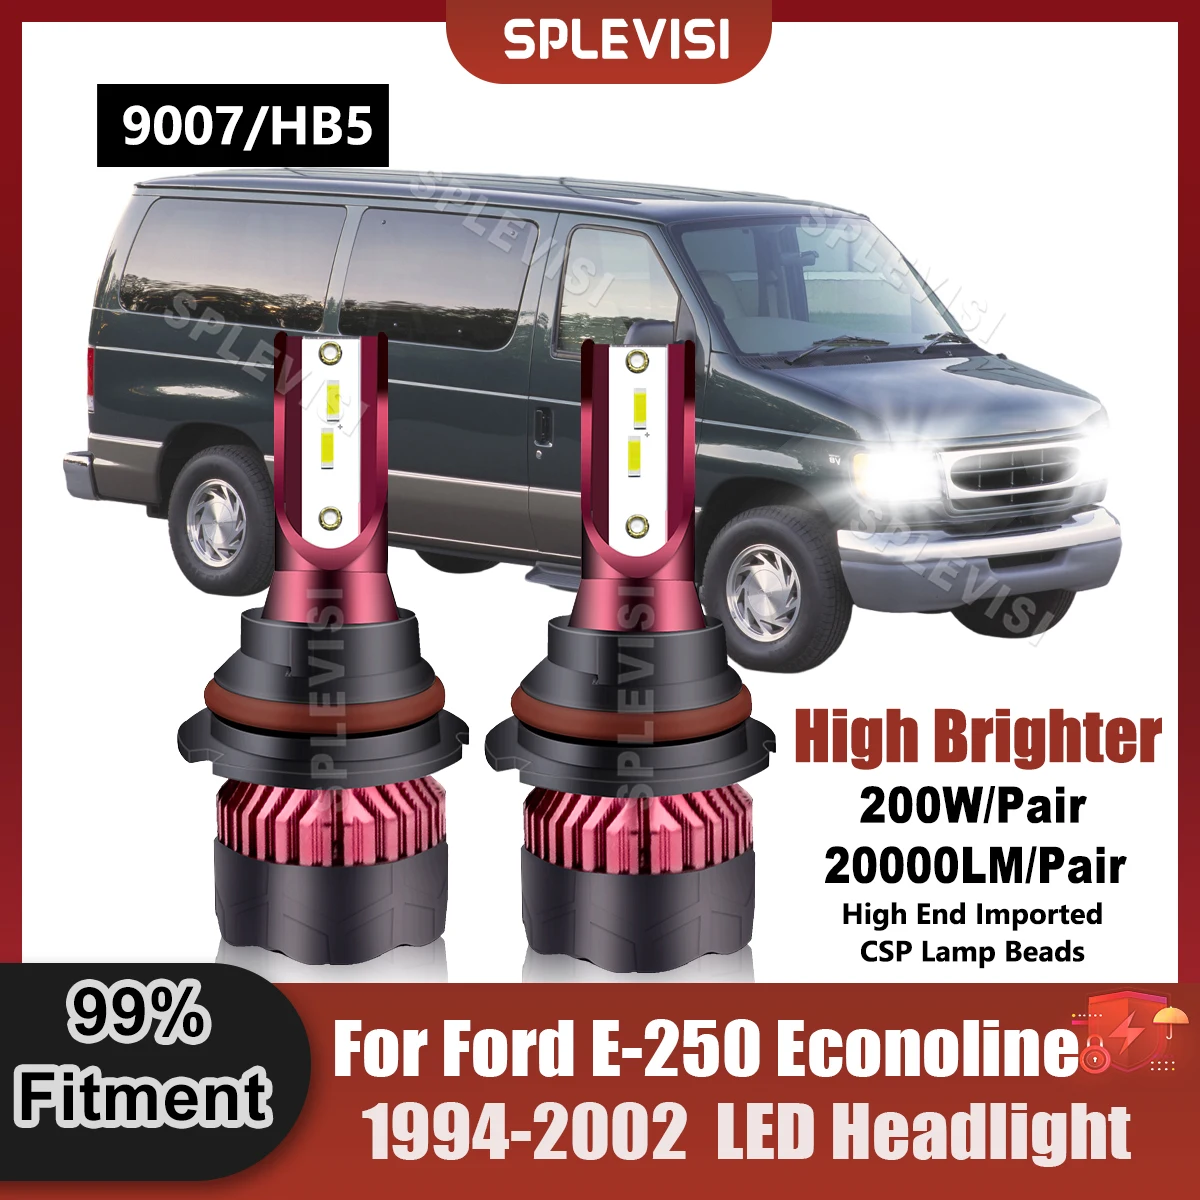 SPLEVISI 9007/HB5 LED Headlight Bulbs For Ford E-250 Econoline 1994 1995 1996 1997 1998 1999 2000 2001 2002 Replace Car Lamp 2x 70w h4 9003 hb2 hs1 8000k ice blue led headlight bulbs for polaris trail boss 325 2000 2001 250 1988 1999 snowmobile